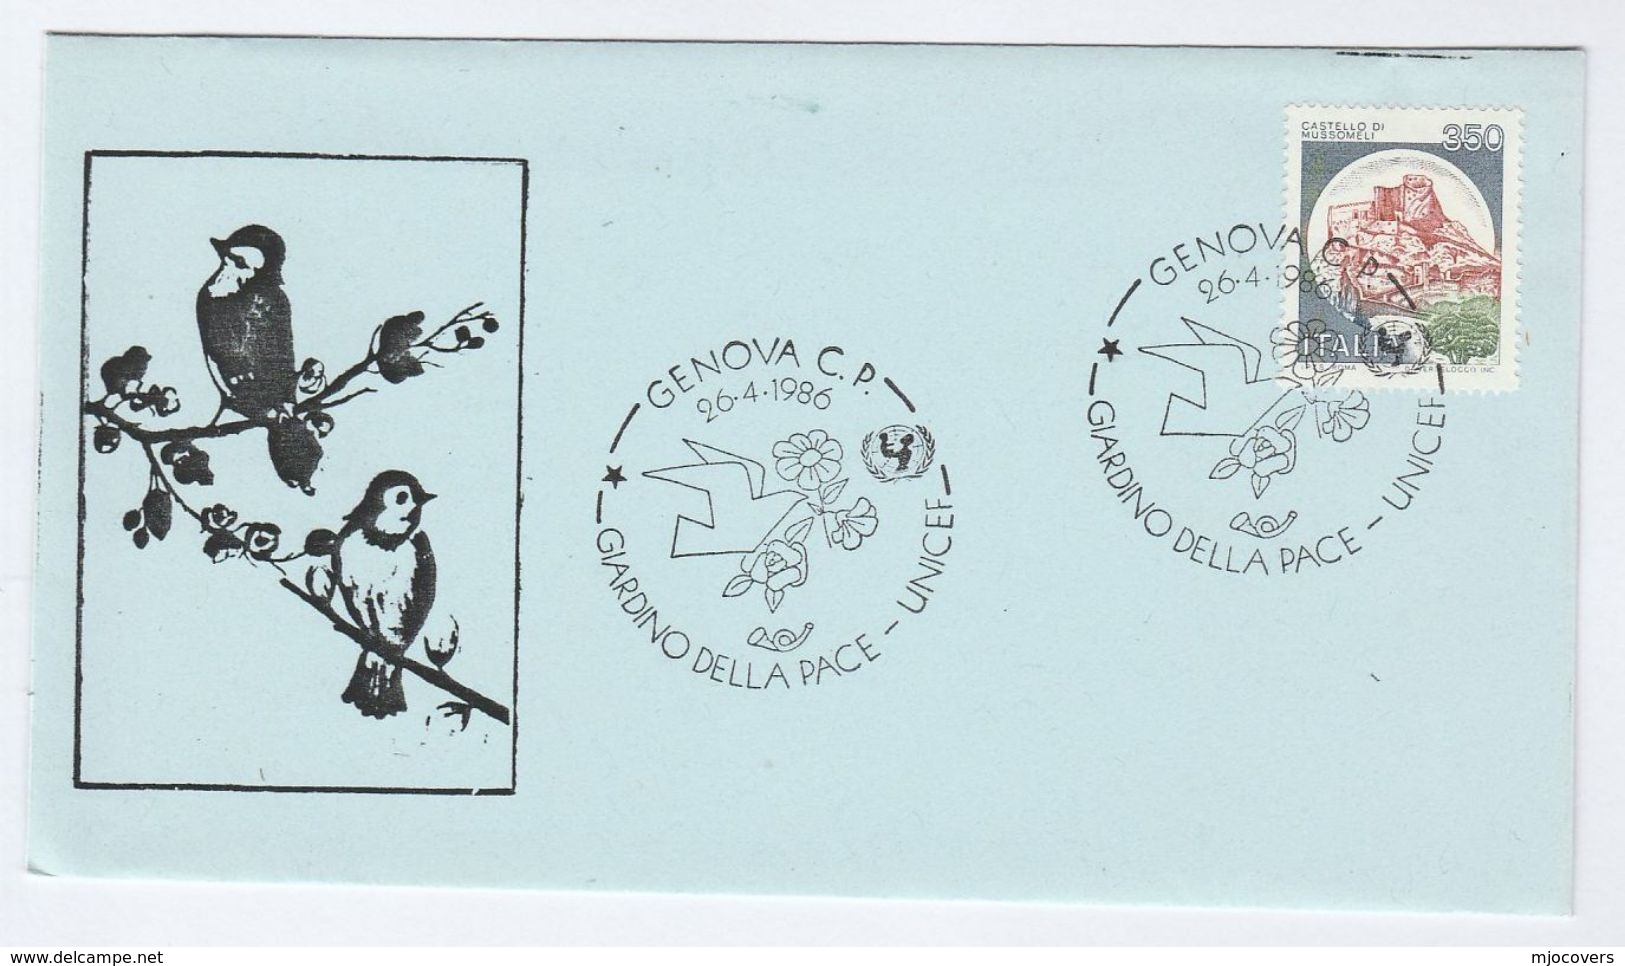 1986 Genoa UNICEF PEACE GARDEN EVENT COVER Italy Un United Nations Bird Flower Stamps Birds - 1981-90: Marcophilia